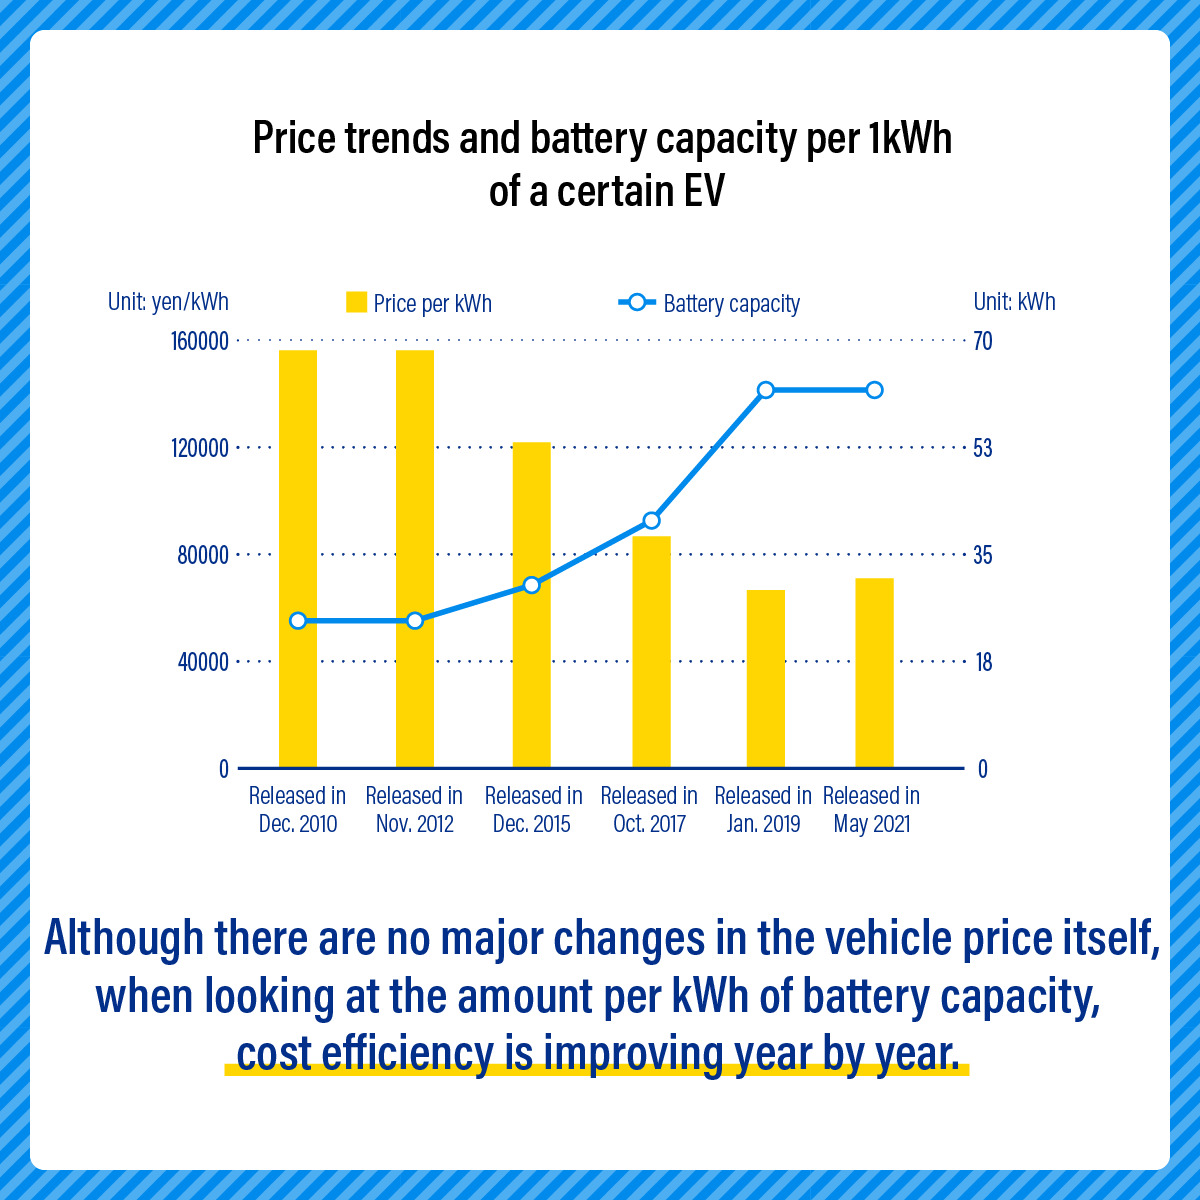 Price trends and battery capacity per 1kWh of a certain EV